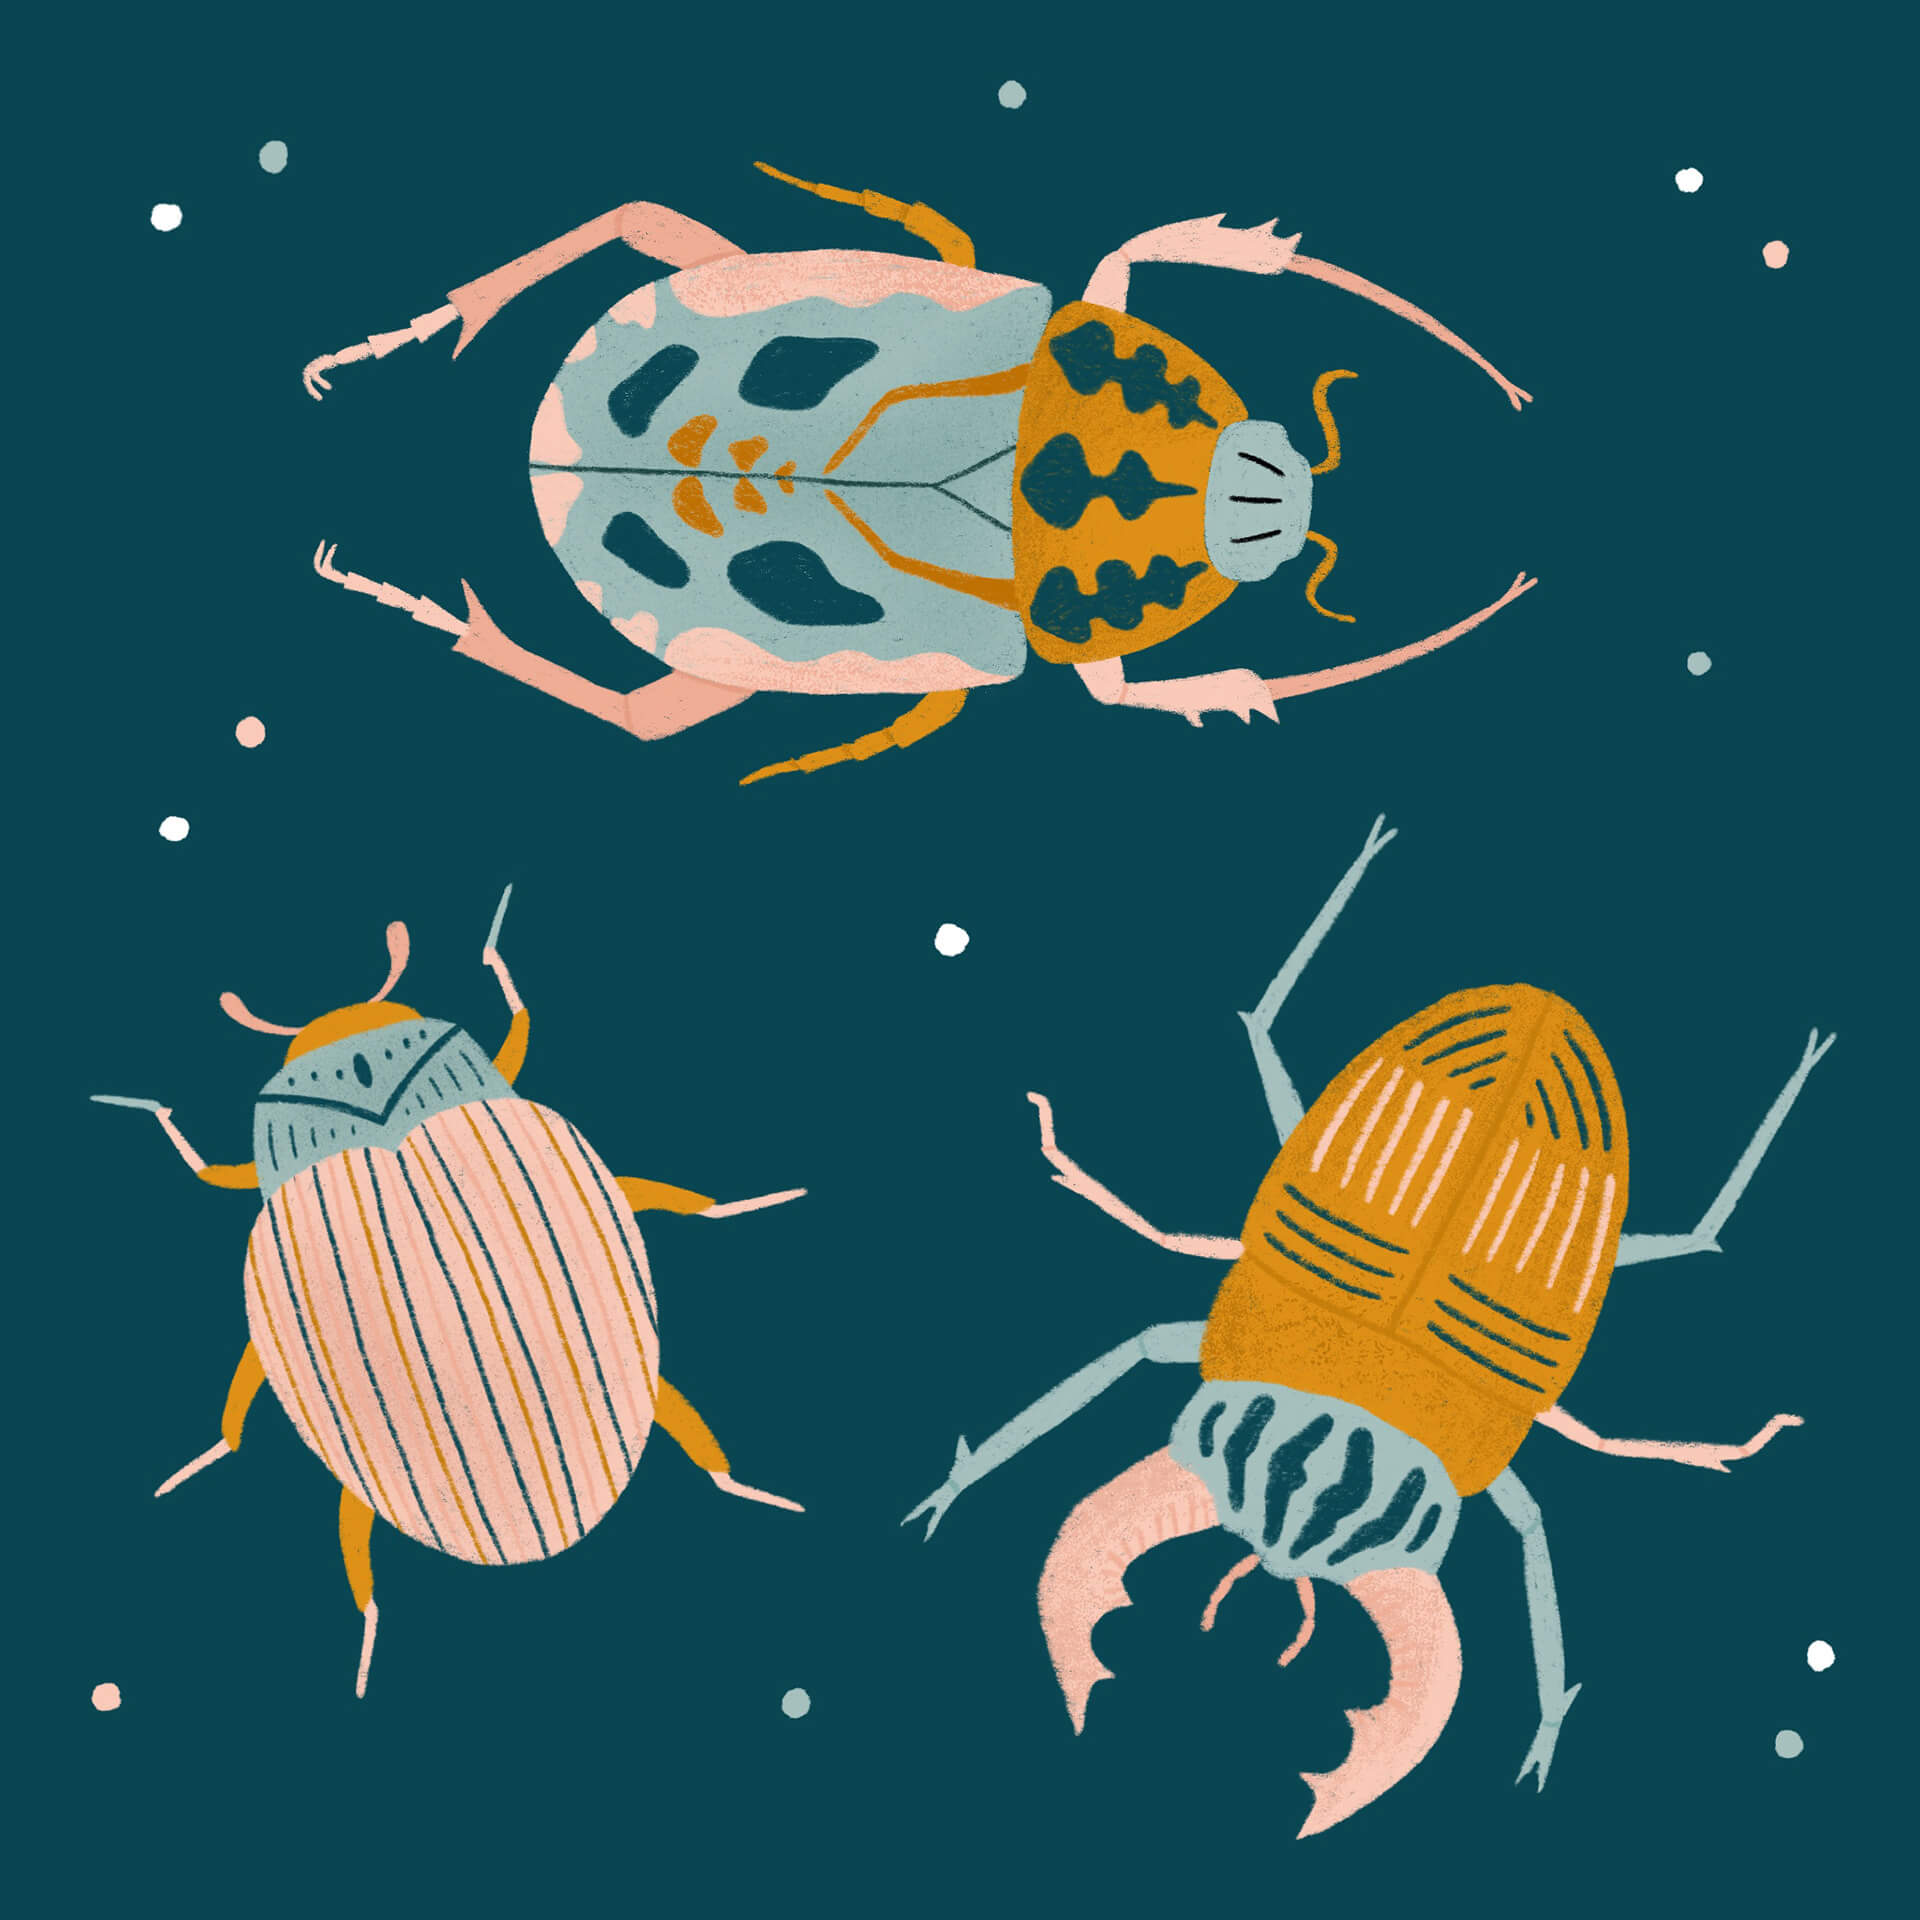 An illustration of three colourful beetles on a blue background